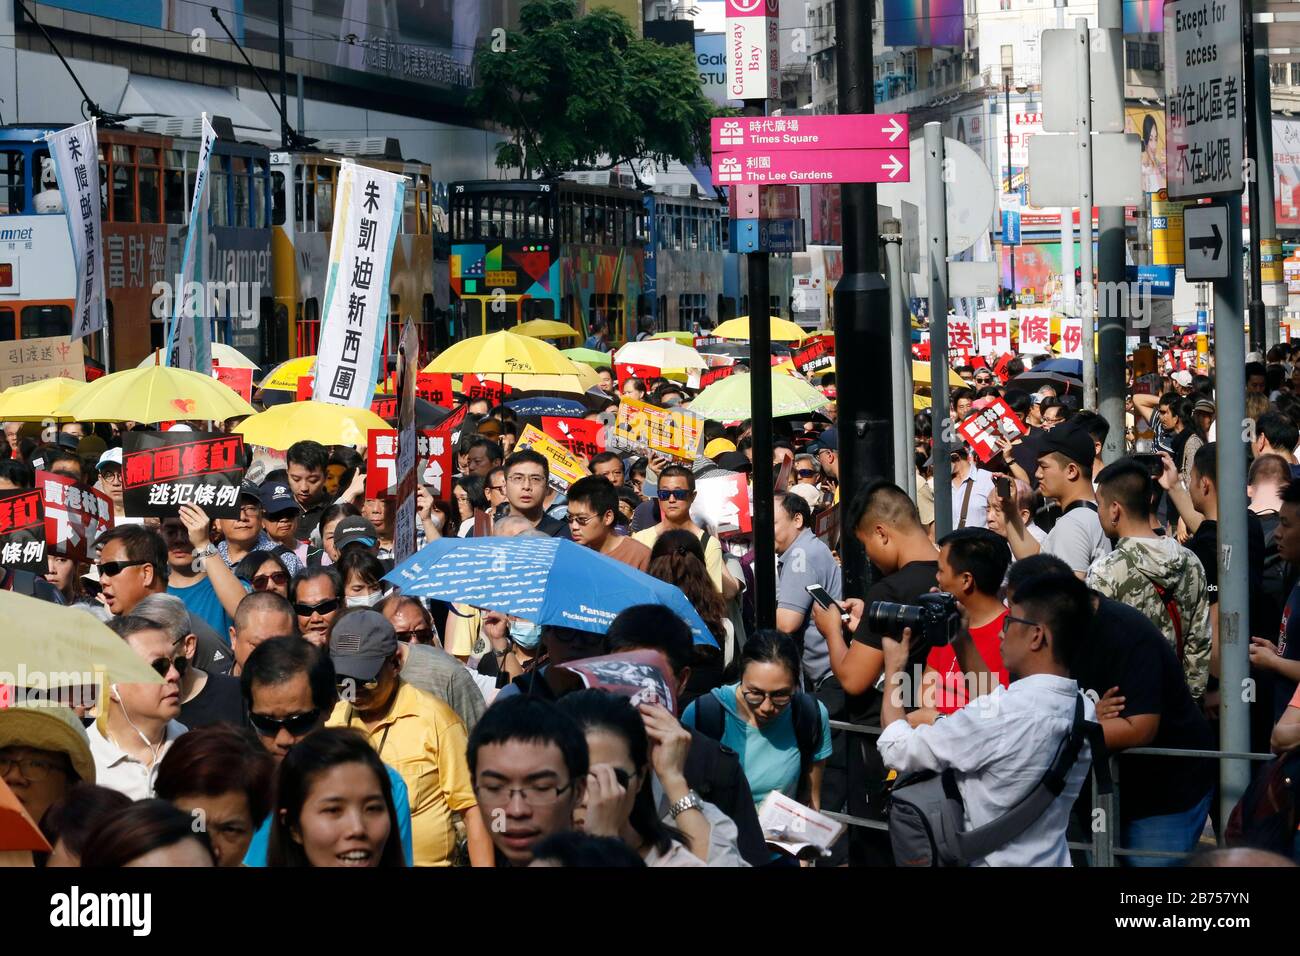 Pro-democracy Hong Kongers take part in a march against a proposed extradition law in Hong Kong, China, 28 April 2019. Earlier in April the Hong Kong government introduced an amendment bill which would allow the transfer of fugitives, on a case-by-case basis, to any jurisdiction with which Hong Kong did not have an agreement, including mainland China, Macau and Taiwan. Stock Photo